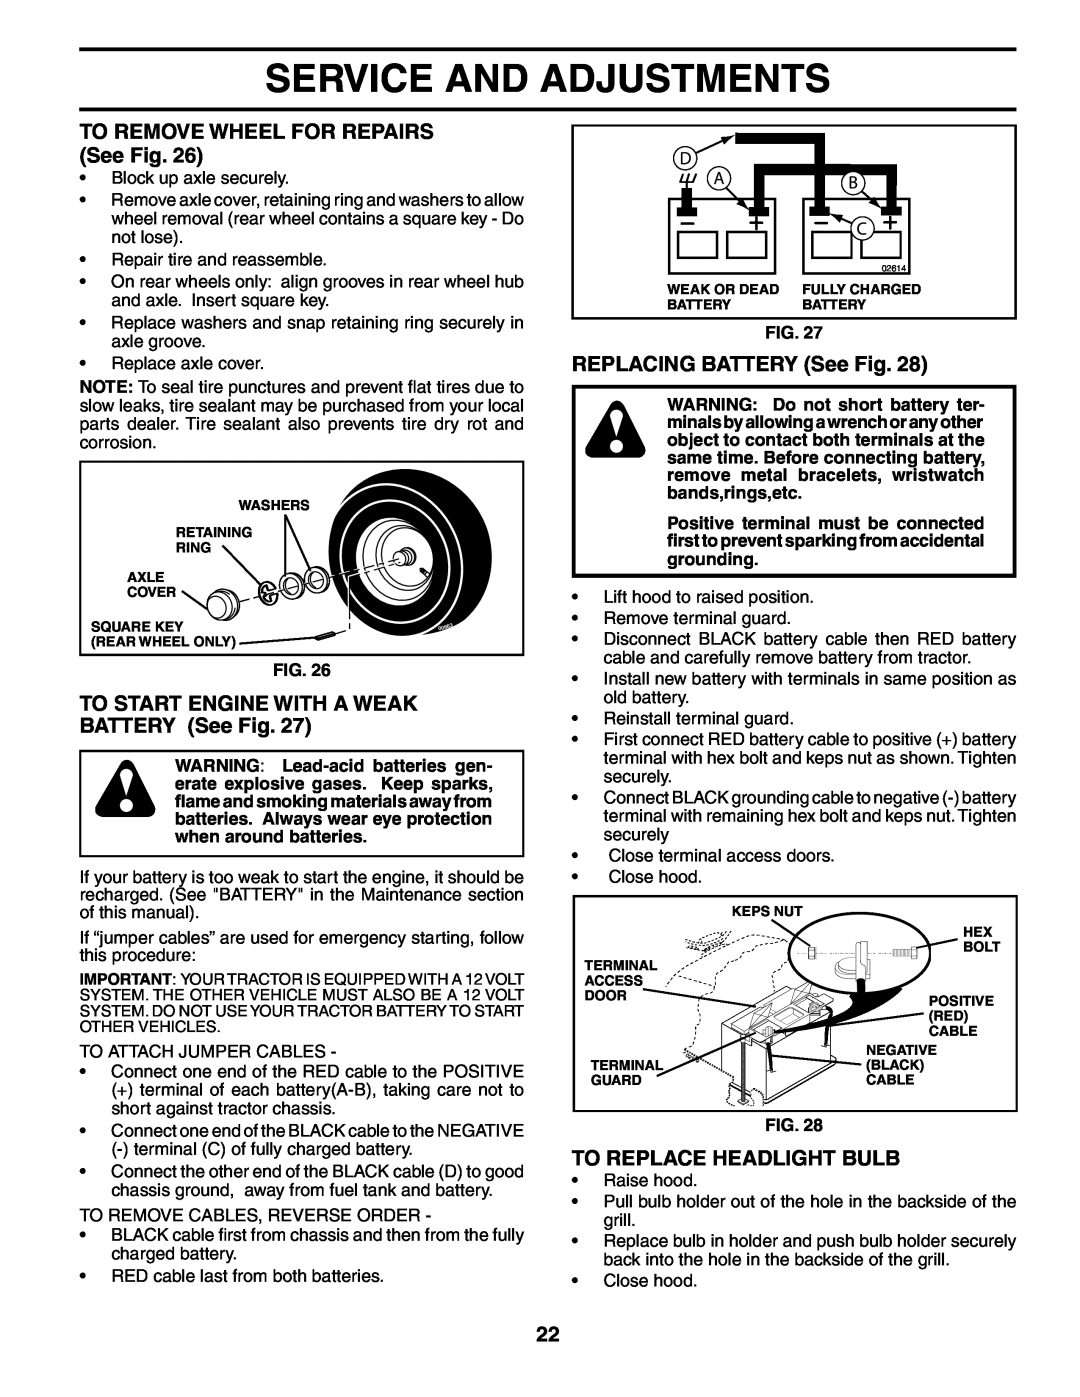 Poulan PR20PH42STD owner manual TO REMOVE WHEEL FOR REPAIRS See Fig, TO START ENGINE WITH A WEAK BATTERY See Fig 